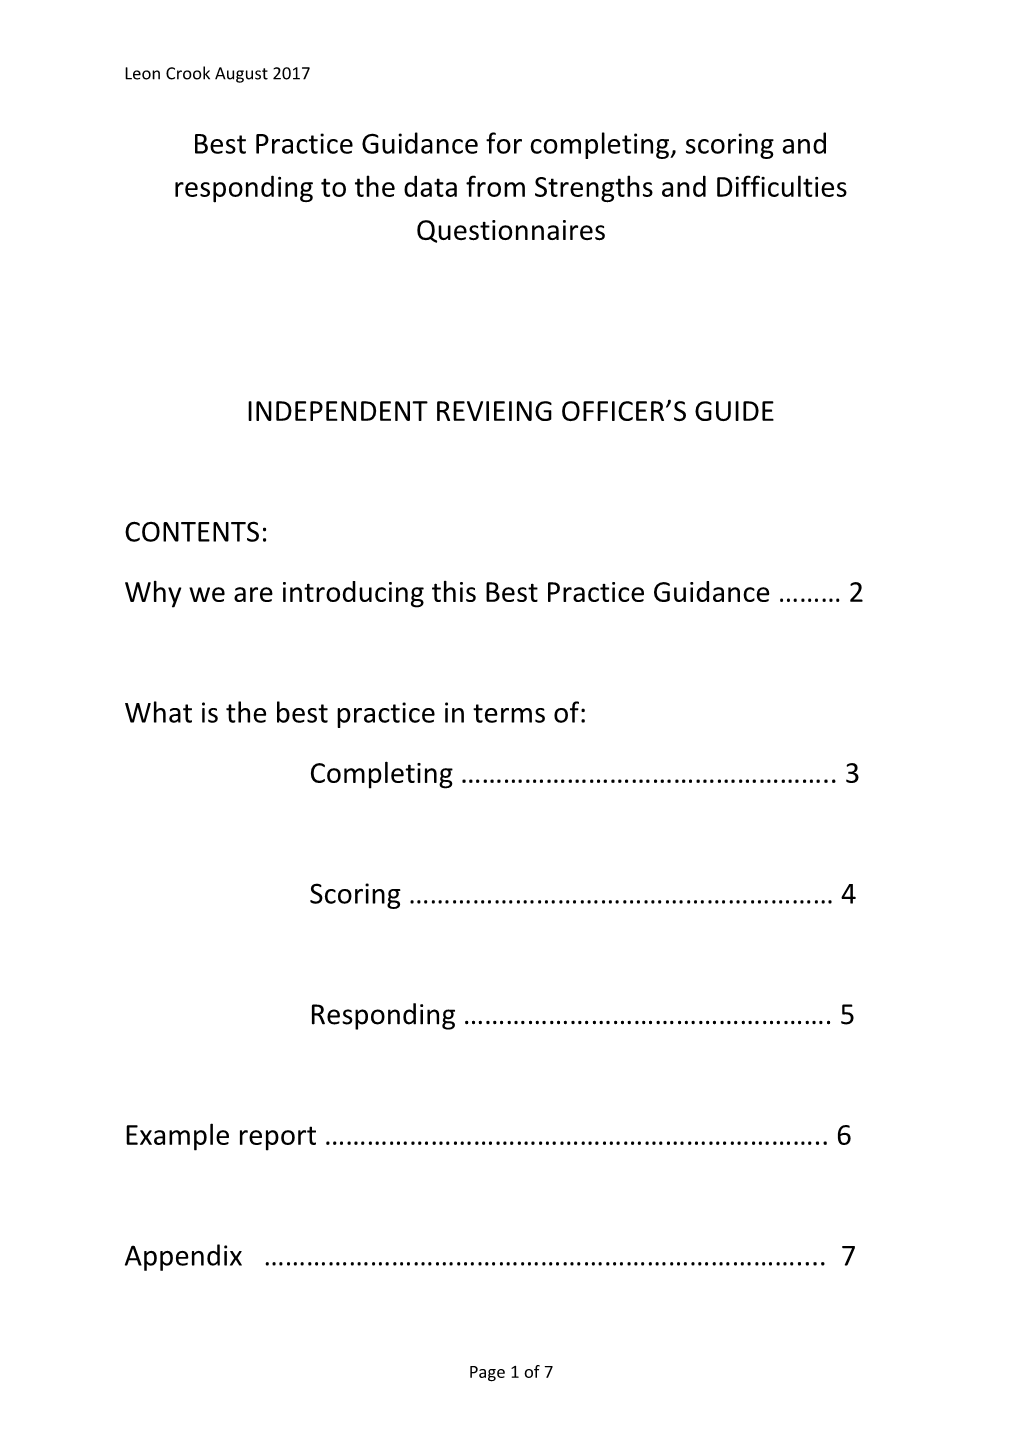 Why We Are Introducing This Best Practice Guidance 2